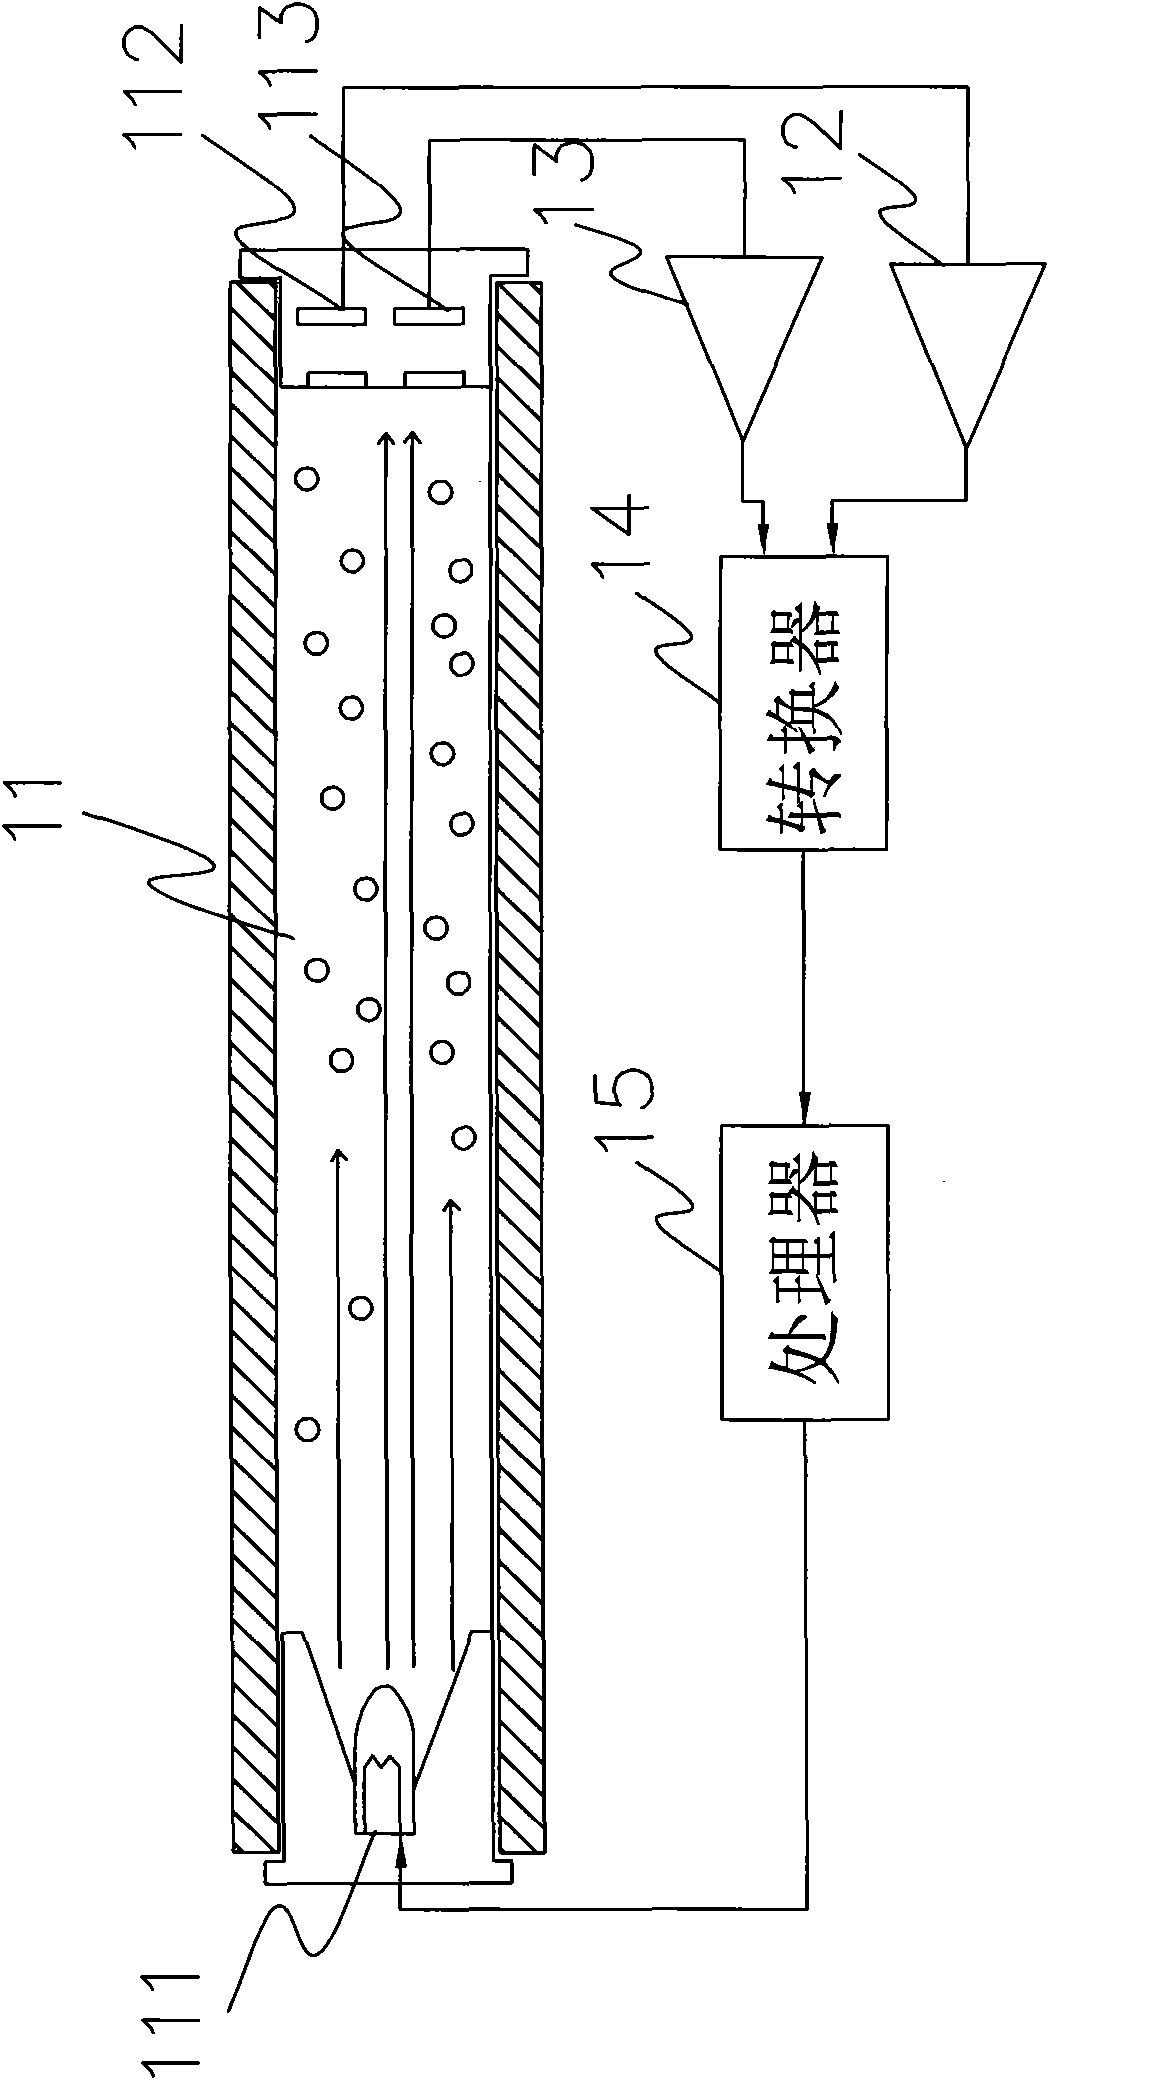 Gas concentration measuring device and method thereof